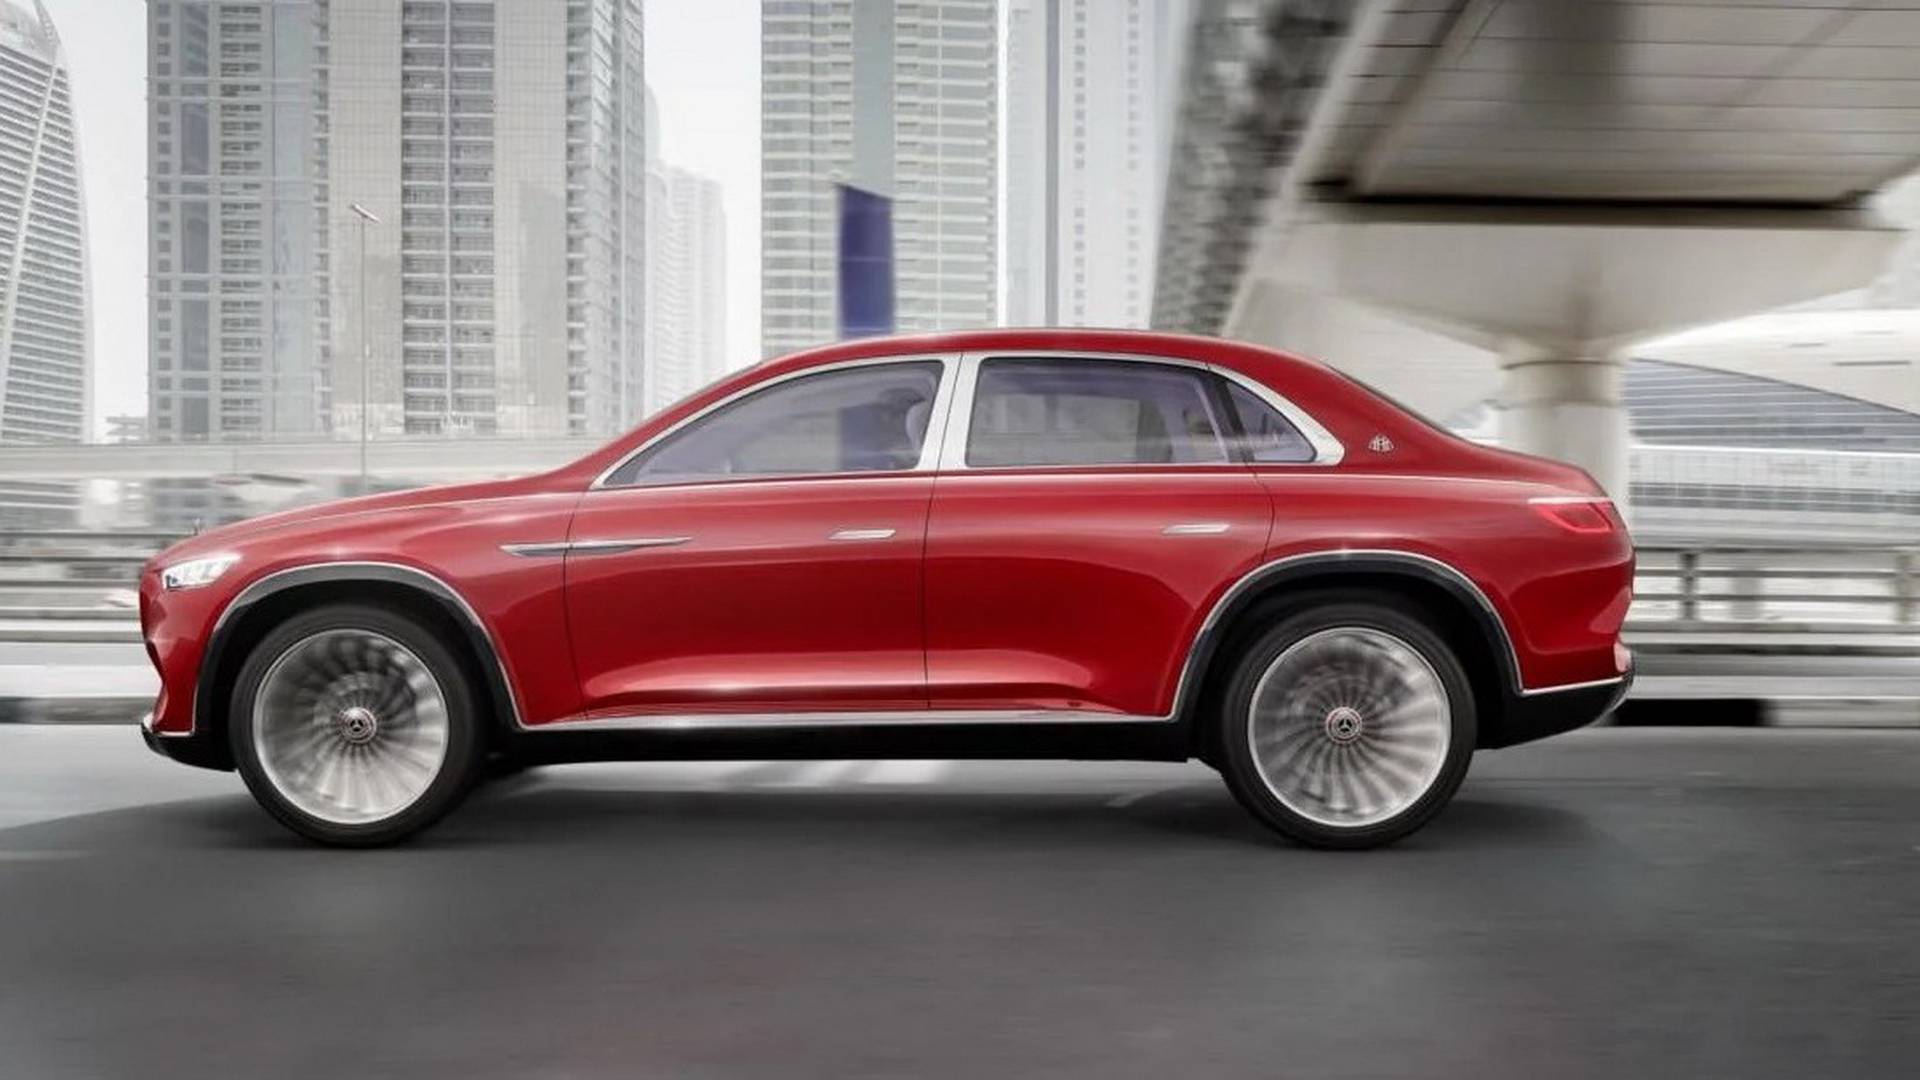 vision-mercedes-maybach-ultimate-luxury-leaked-official-image (5)